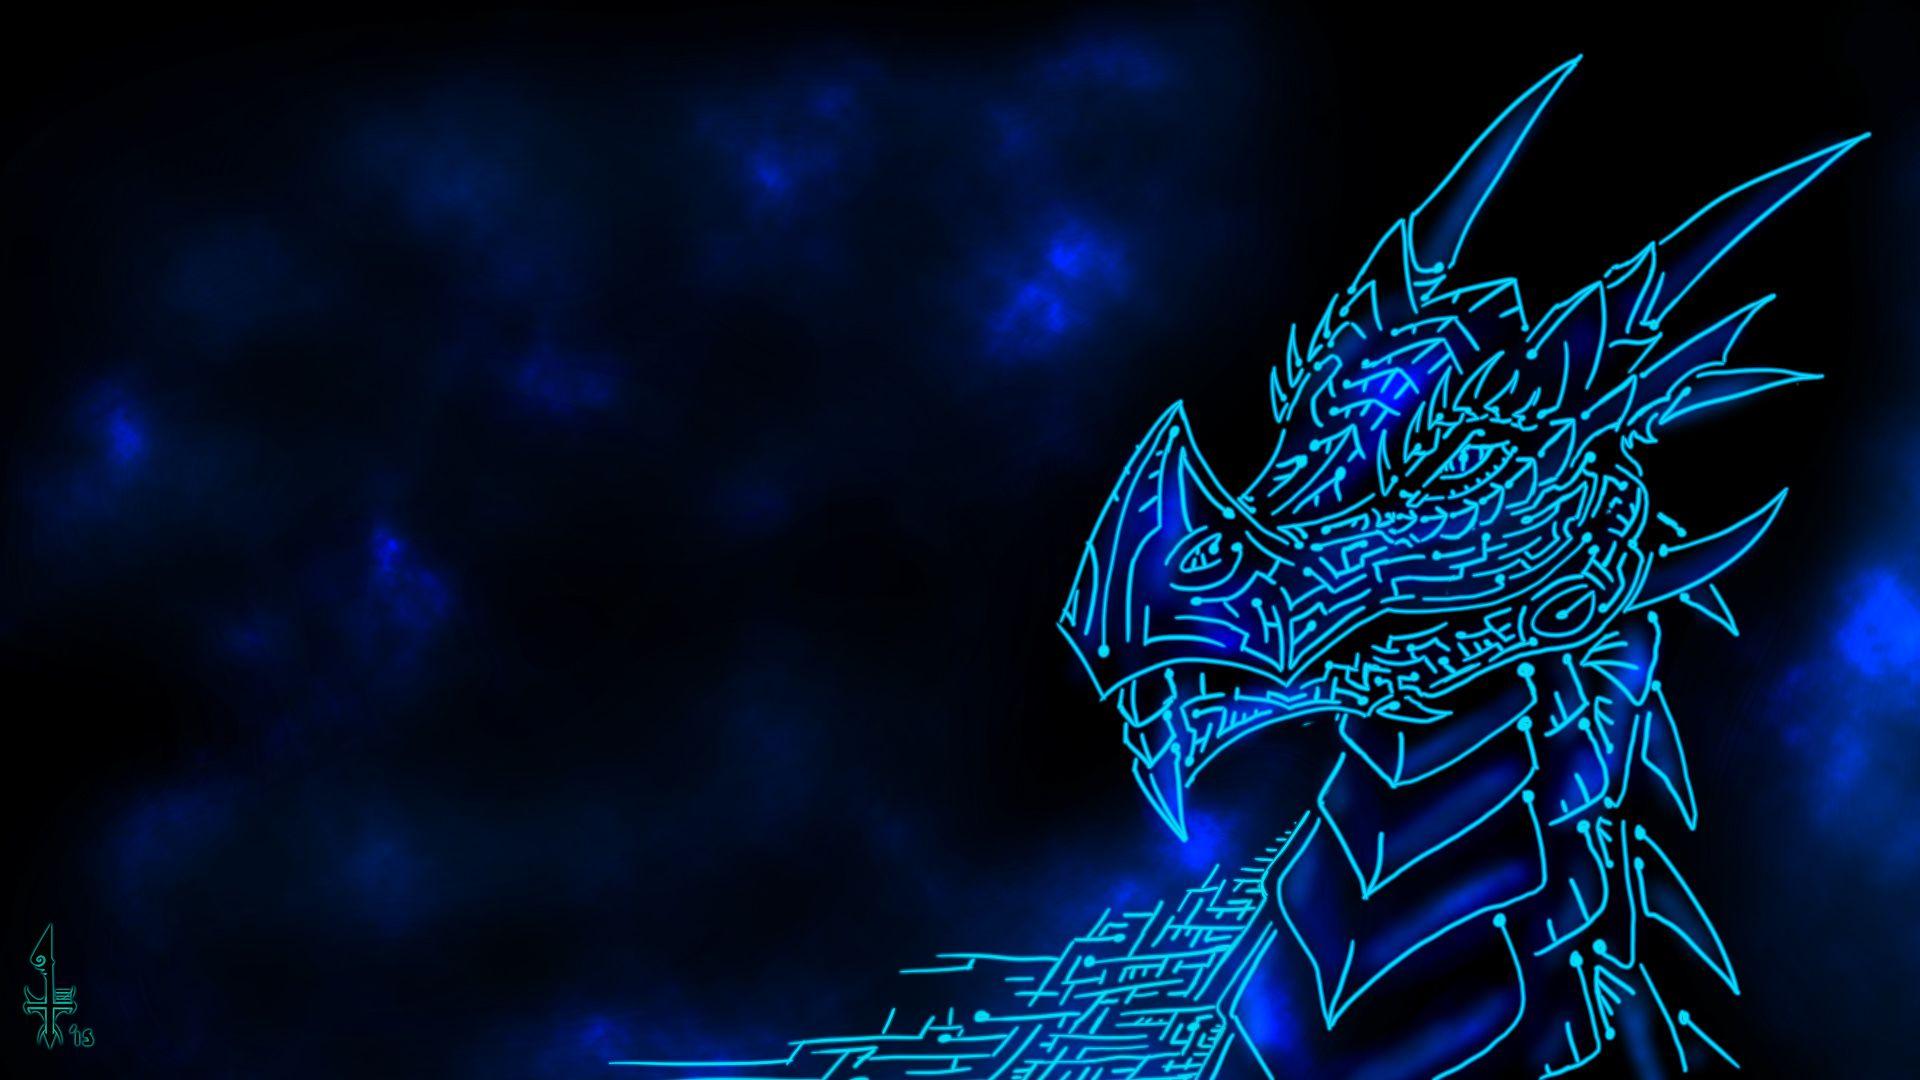 Blue Neon Dragon Wallpapers Wallpaper Cave